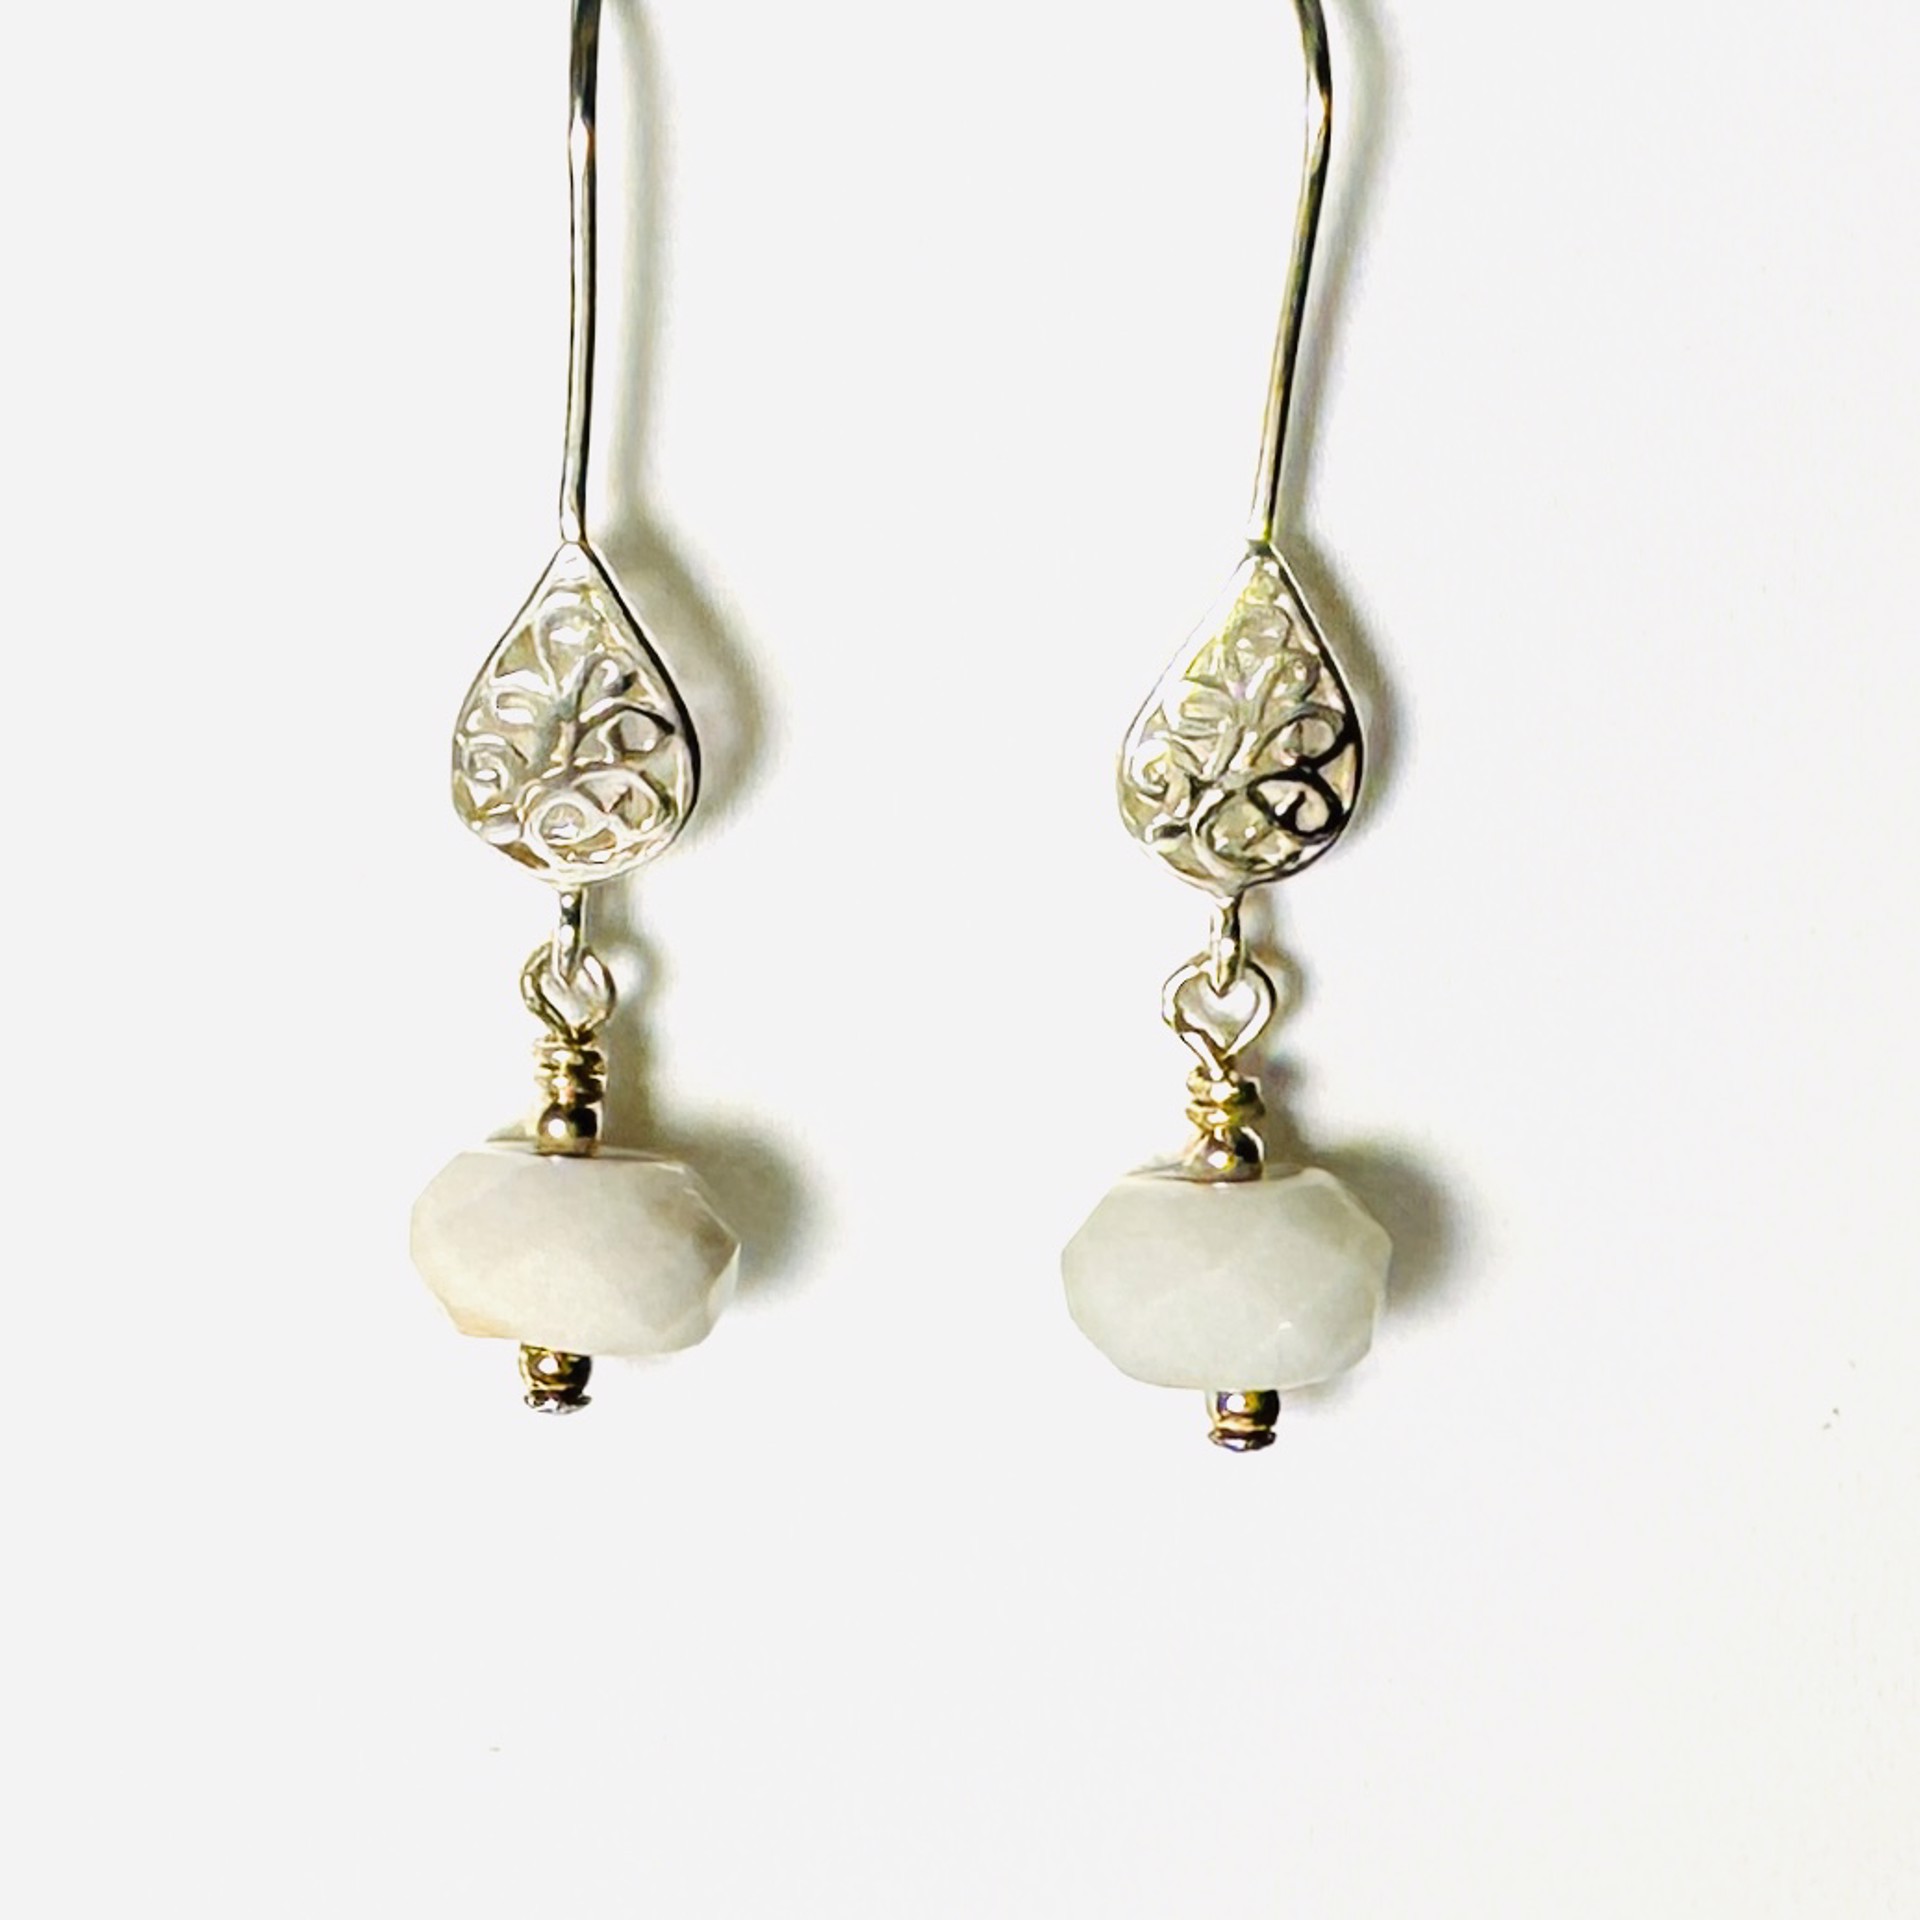 Moonstone, SS Filigree Earrings LR24-29 by Legare Riano